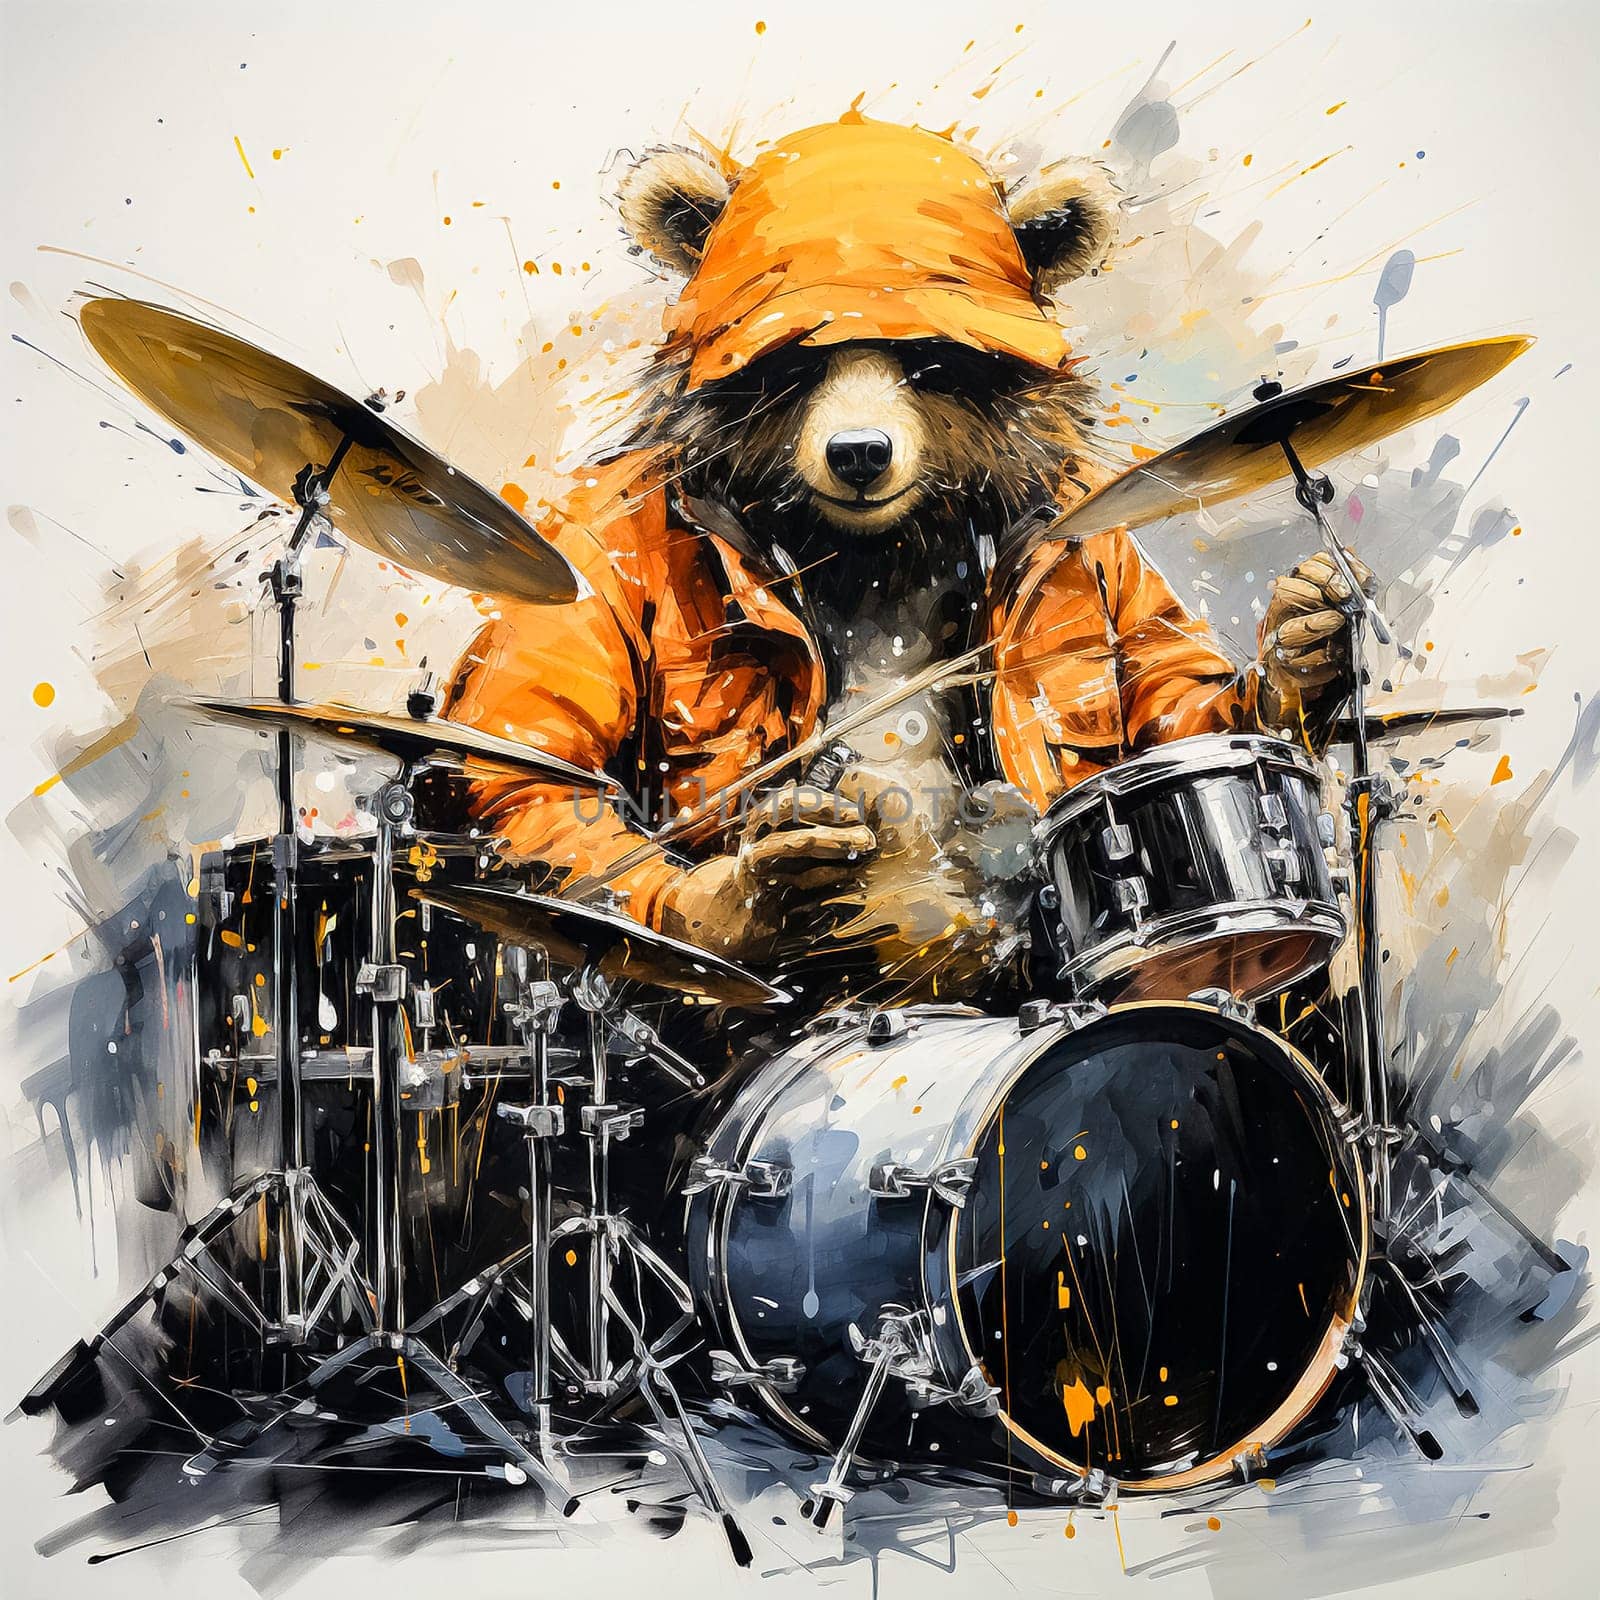 In a lively watercolor illustration, a bear is depicted enthusiastically playing the drums, adding rhythm and charm to the vibrant musical scene.